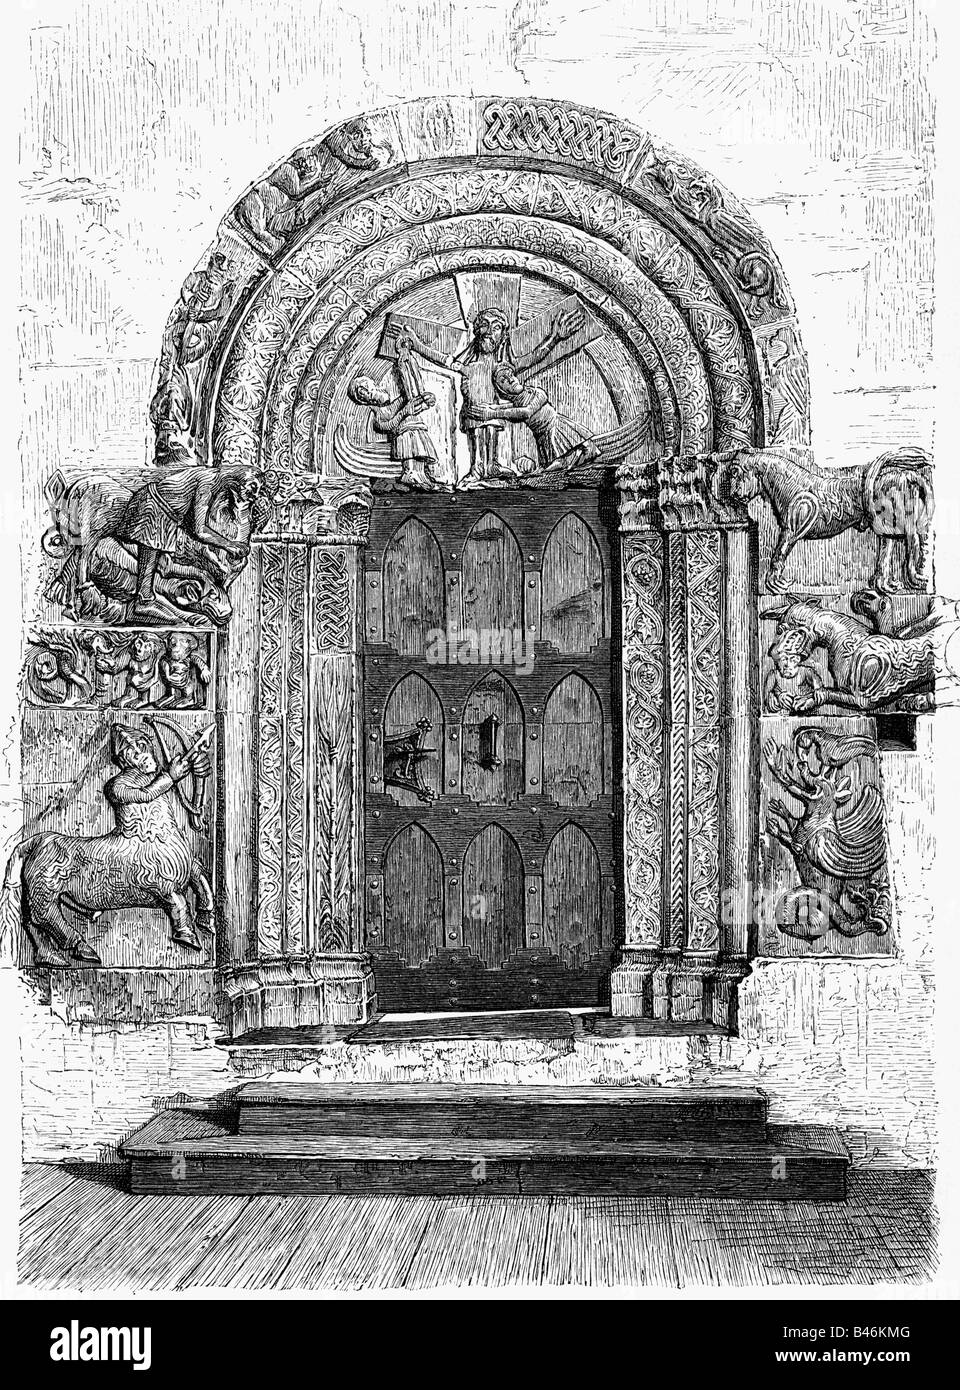 architecture, houses, detail, Romanesque porch, chappel, Tyrol Castle near Meran, South Tyrol, wood engraving, 19th century, middle ages, Austria, Italy, door, historic, historical, medieval, Stock Photo